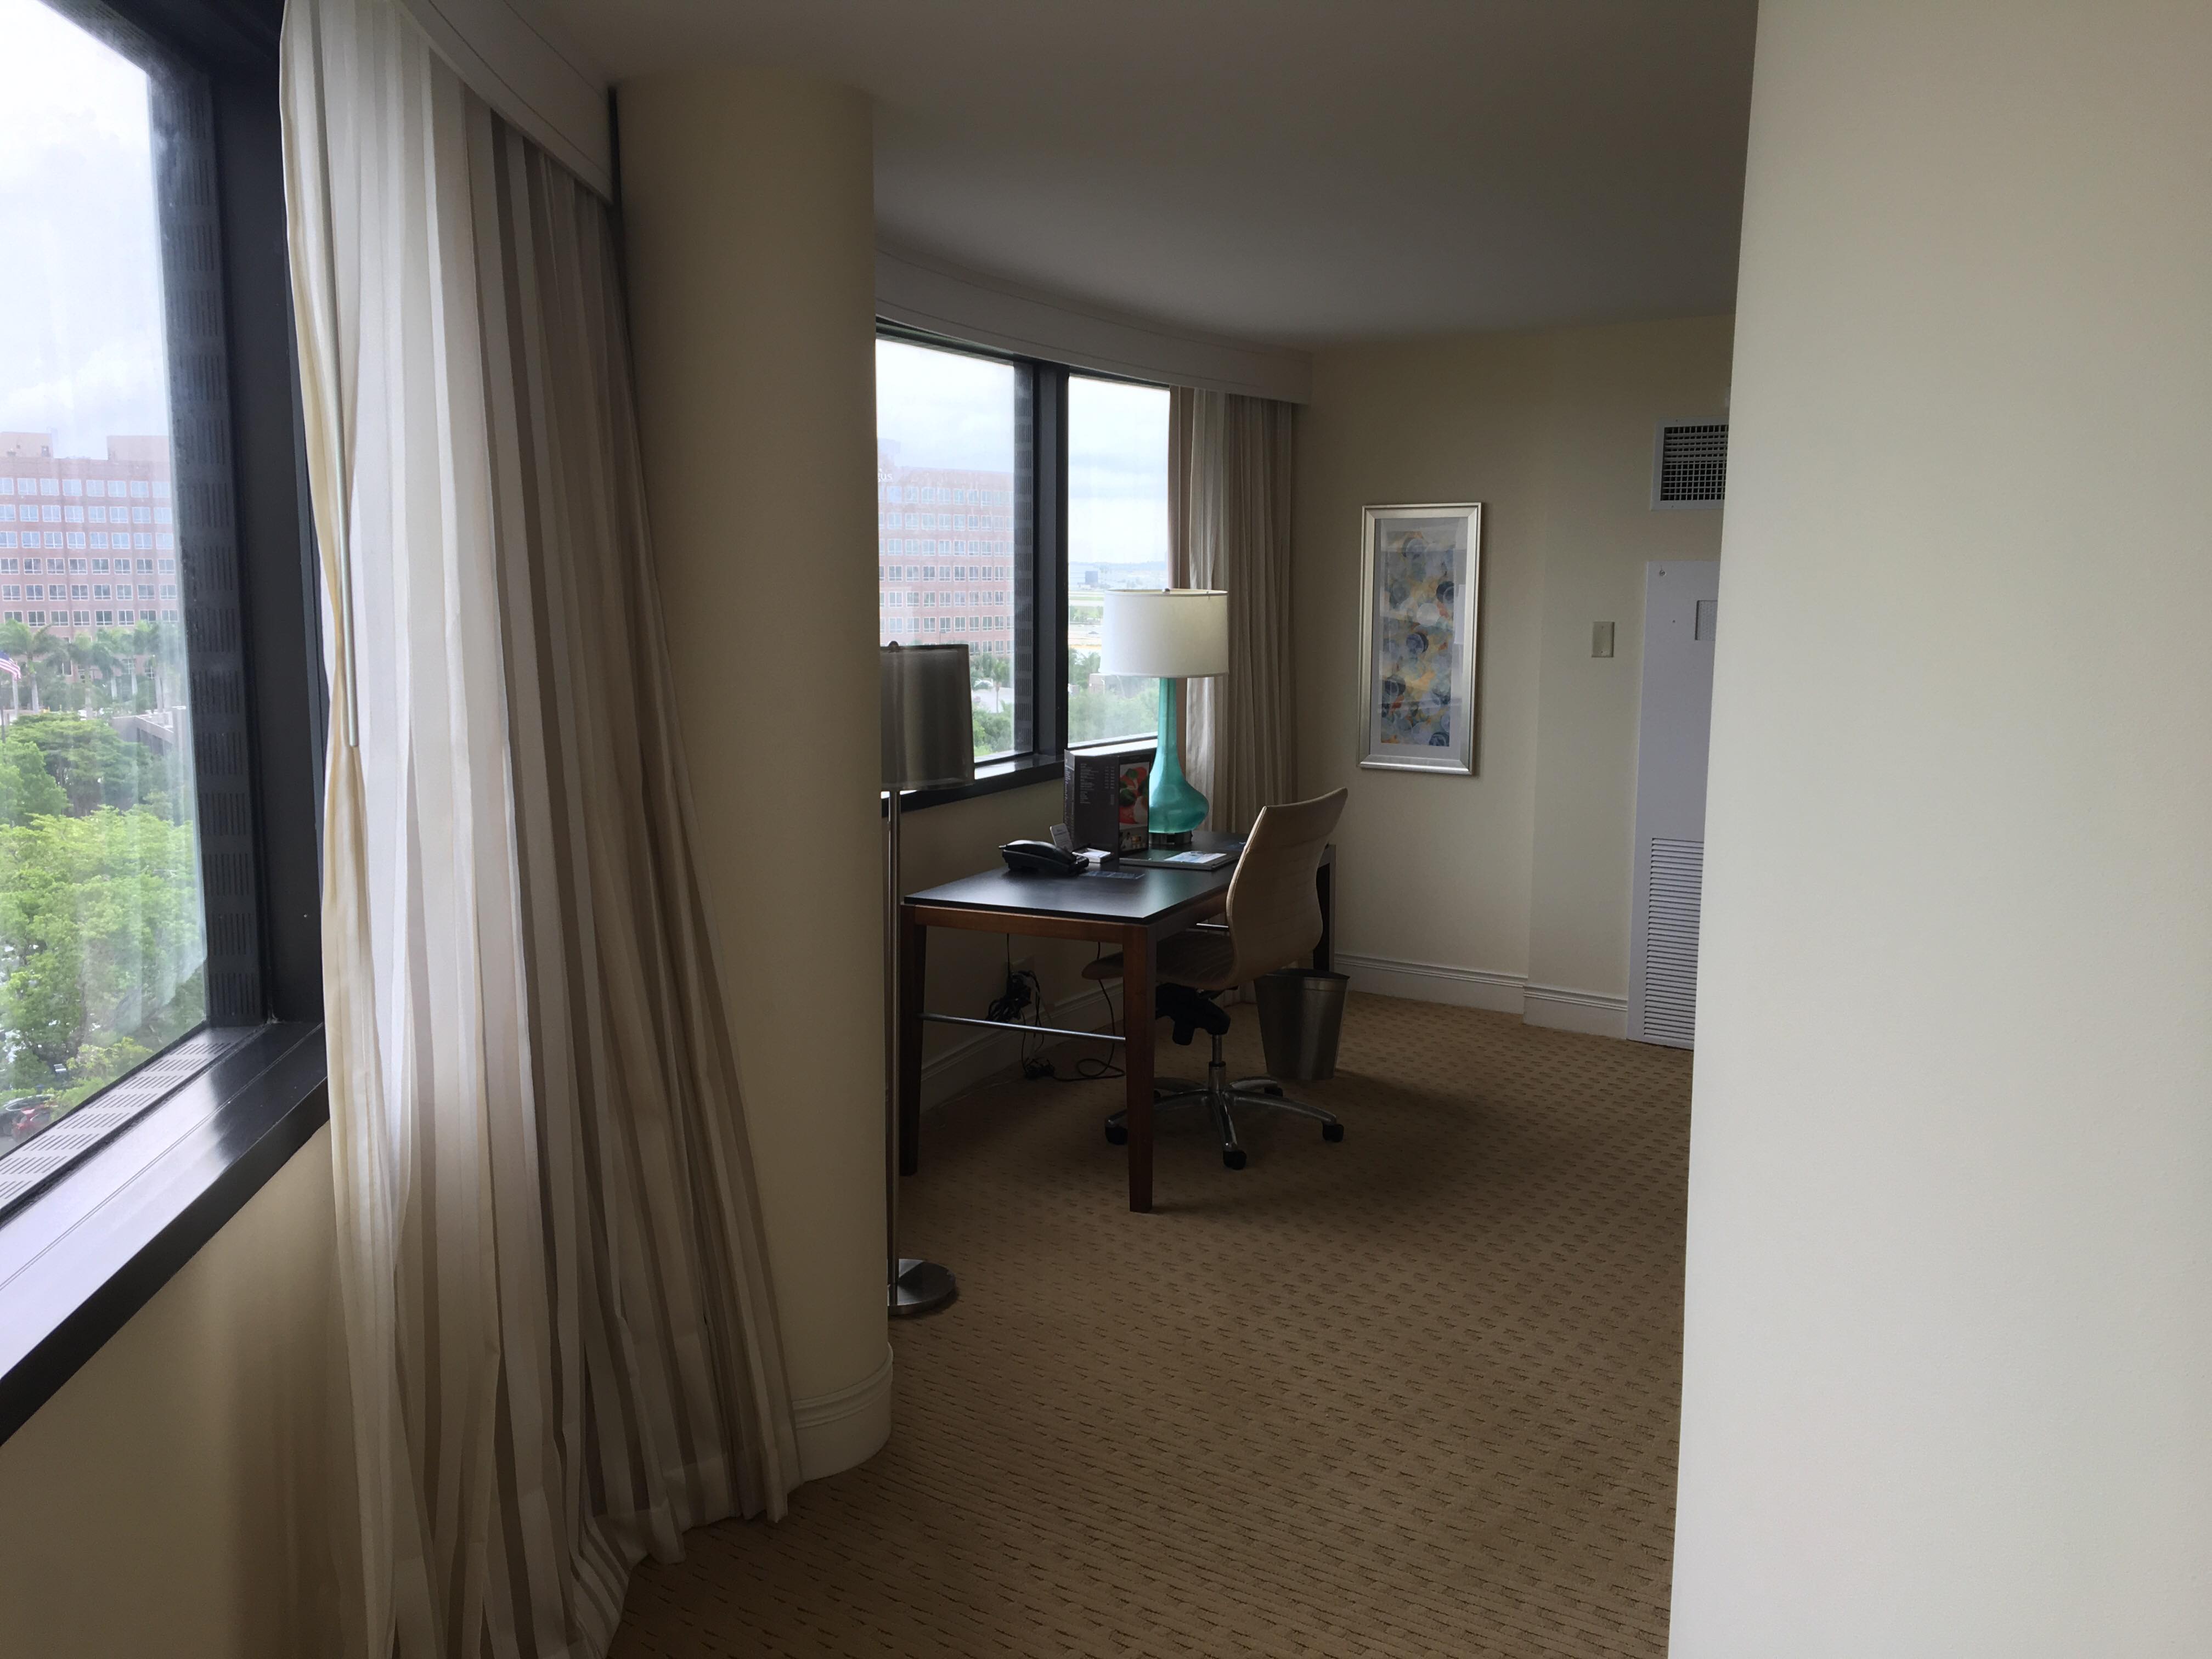 Why I Ll Never Stay At A Hilton Again Travelupdate